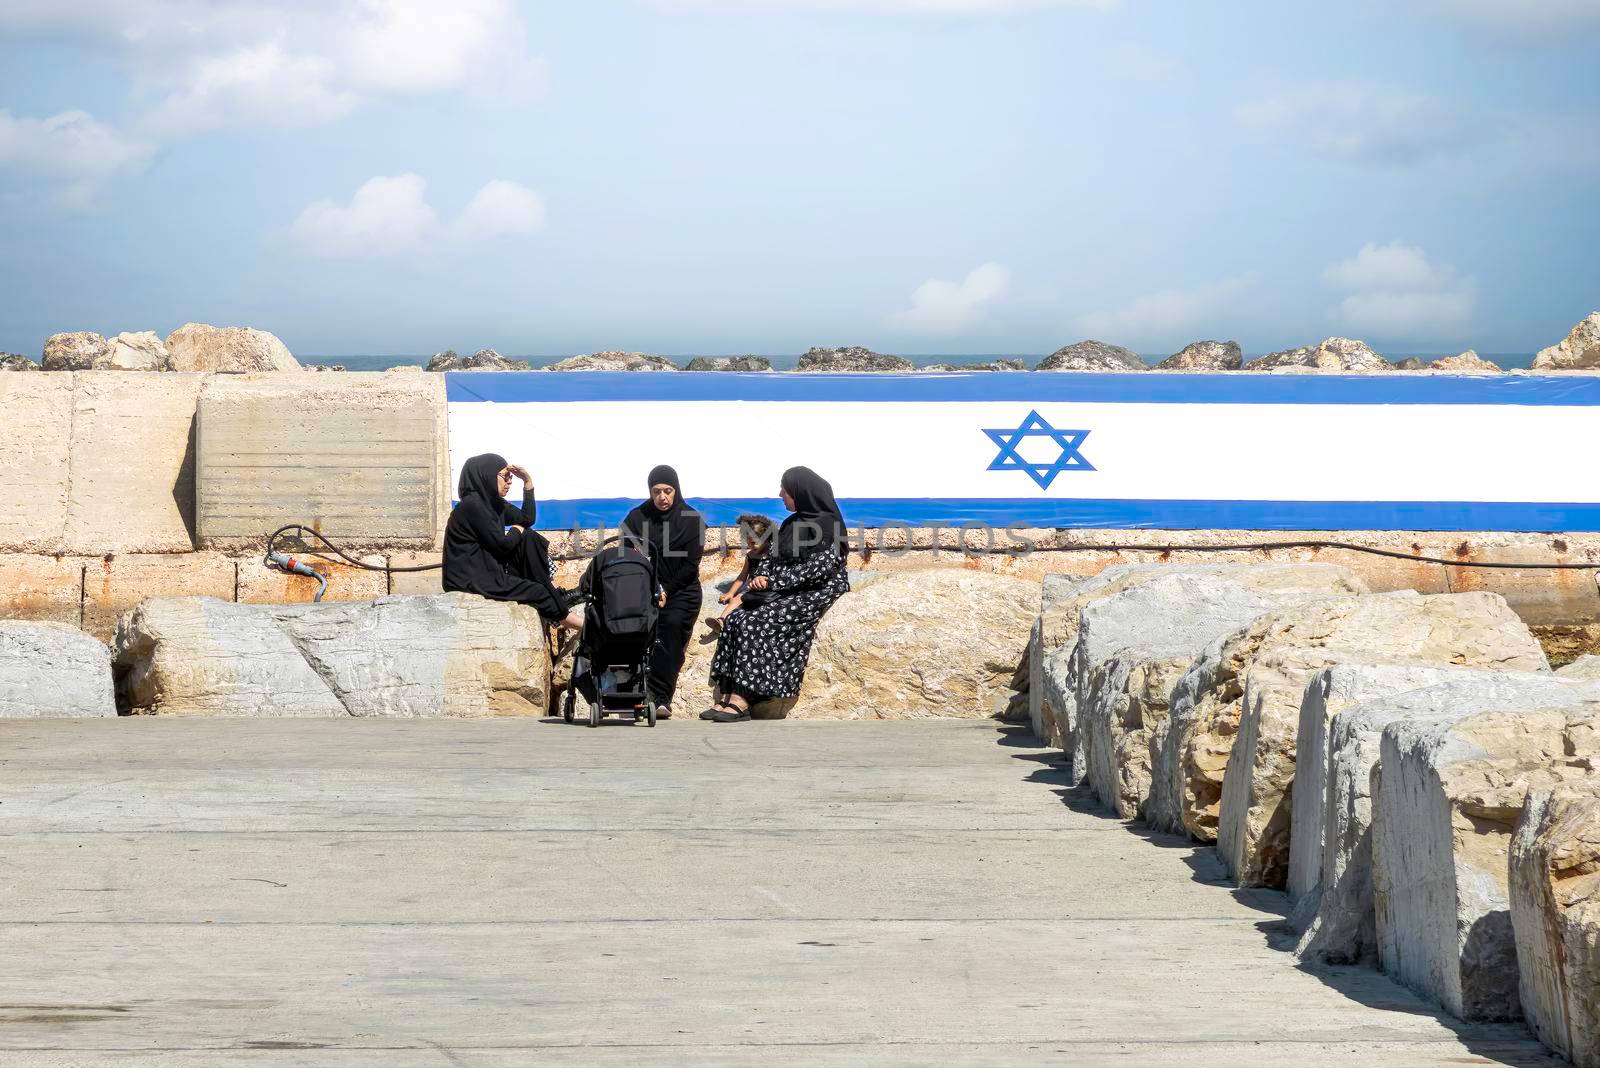 Arab women with Chador, sitting in the port of Old Jaffa with the Israeli flag in the background. The concept for peace. by avirozen